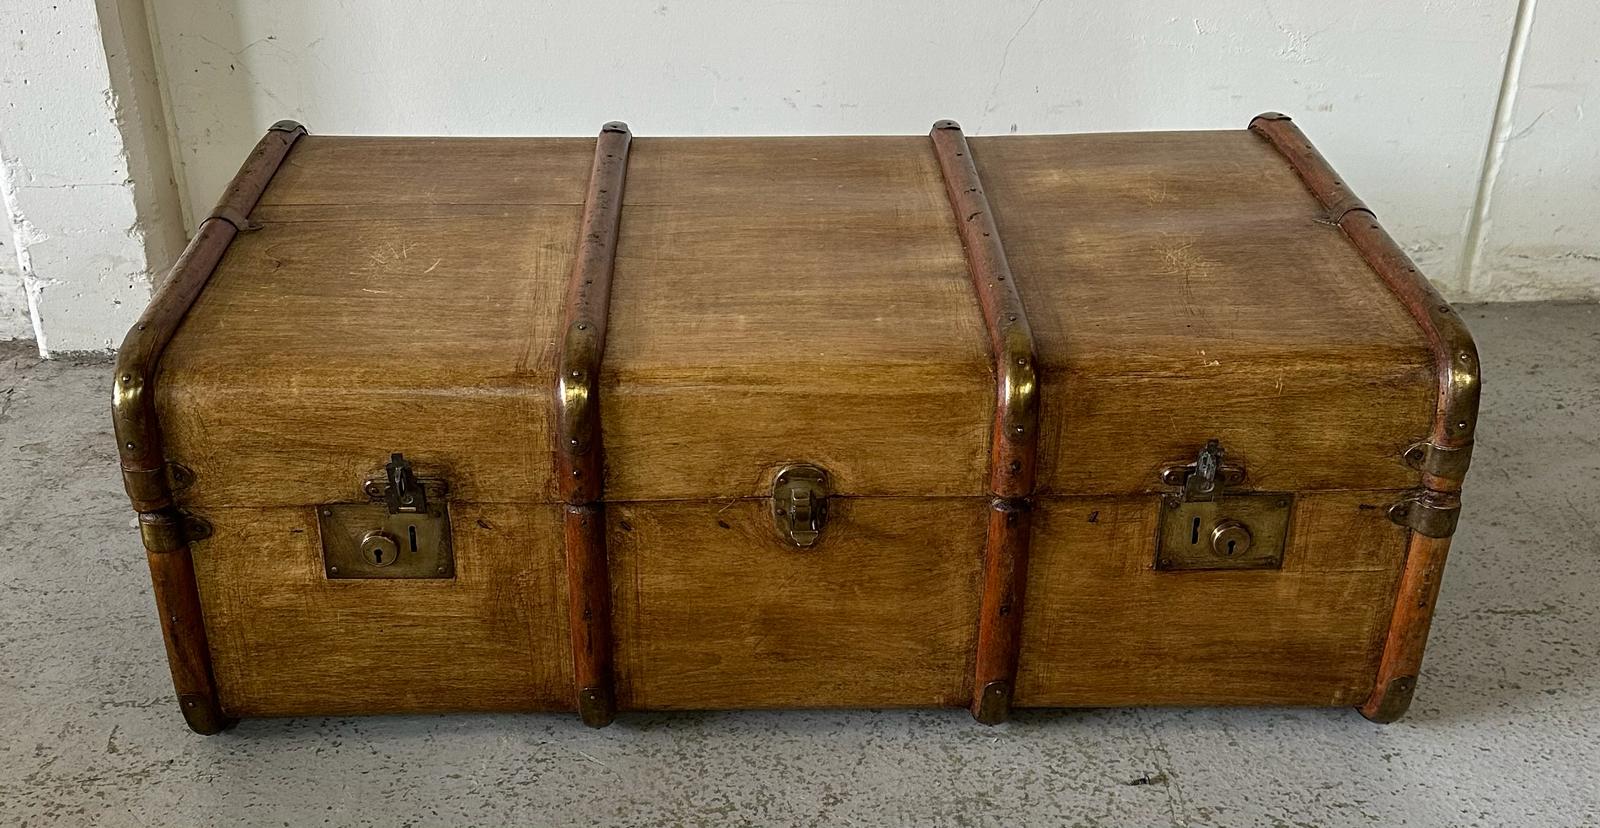 A vintage wooden banded steamer trunk with brass fittings and leather strap handles at end (84cm x